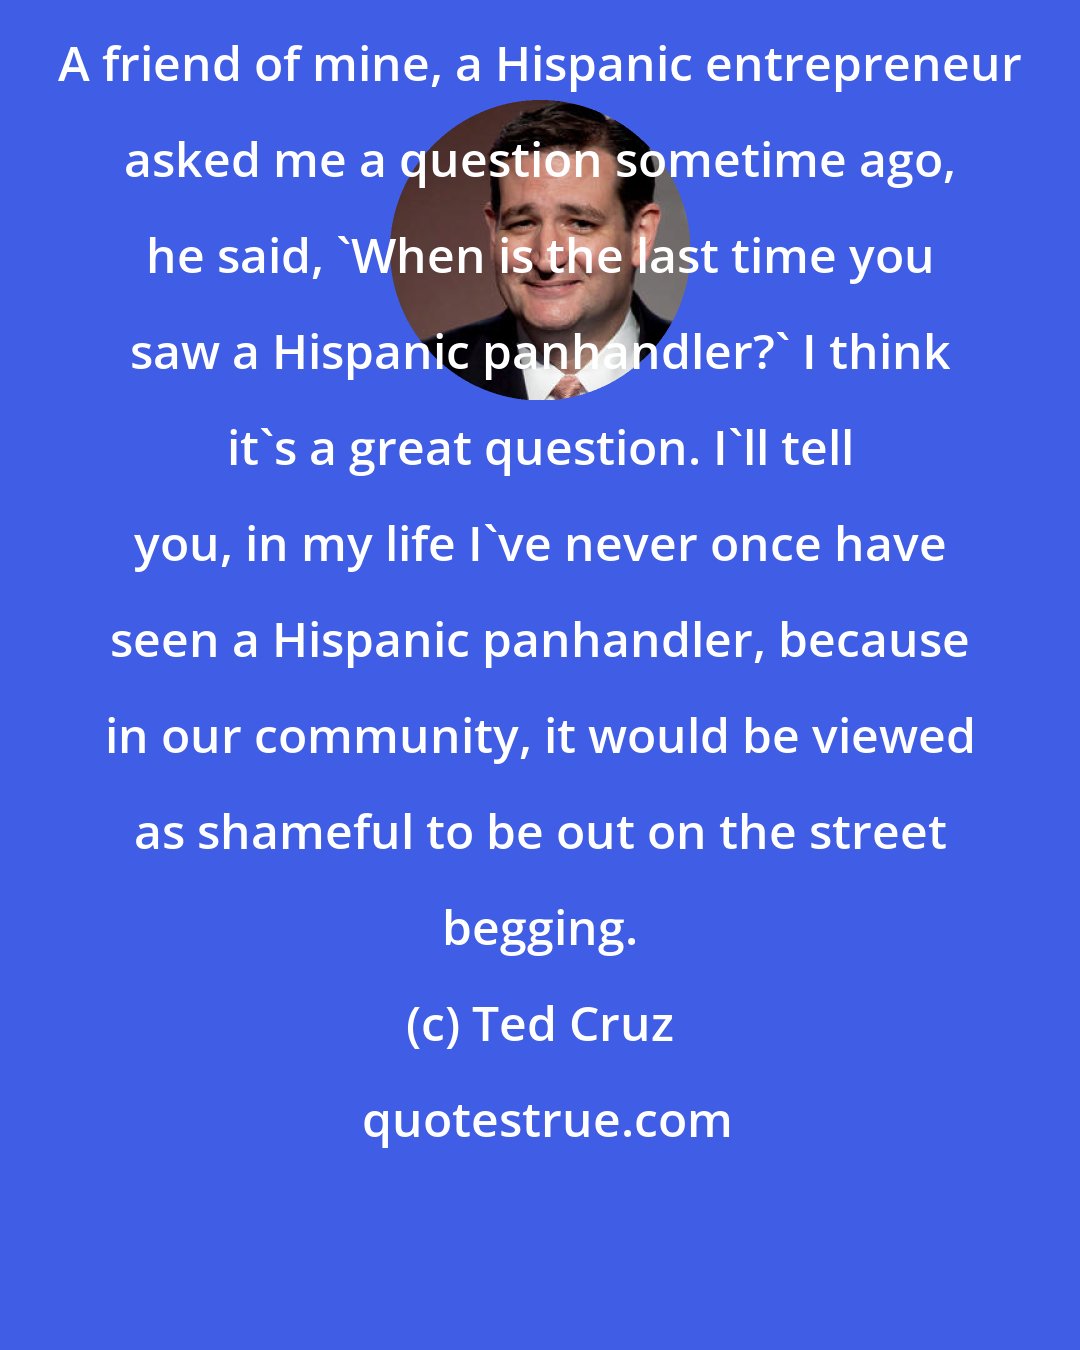 Ted Cruz: A friend of mine, a Hispanic entrepreneur asked me a question sometime ago, he said, 'When is the last time you saw a Hispanic panhandler?' I think it's a great question. I'll tell you, in my life I've never once have seen a Hispanic panhandler, because in our community, it would be viewed as shameful to be out on the street begging.